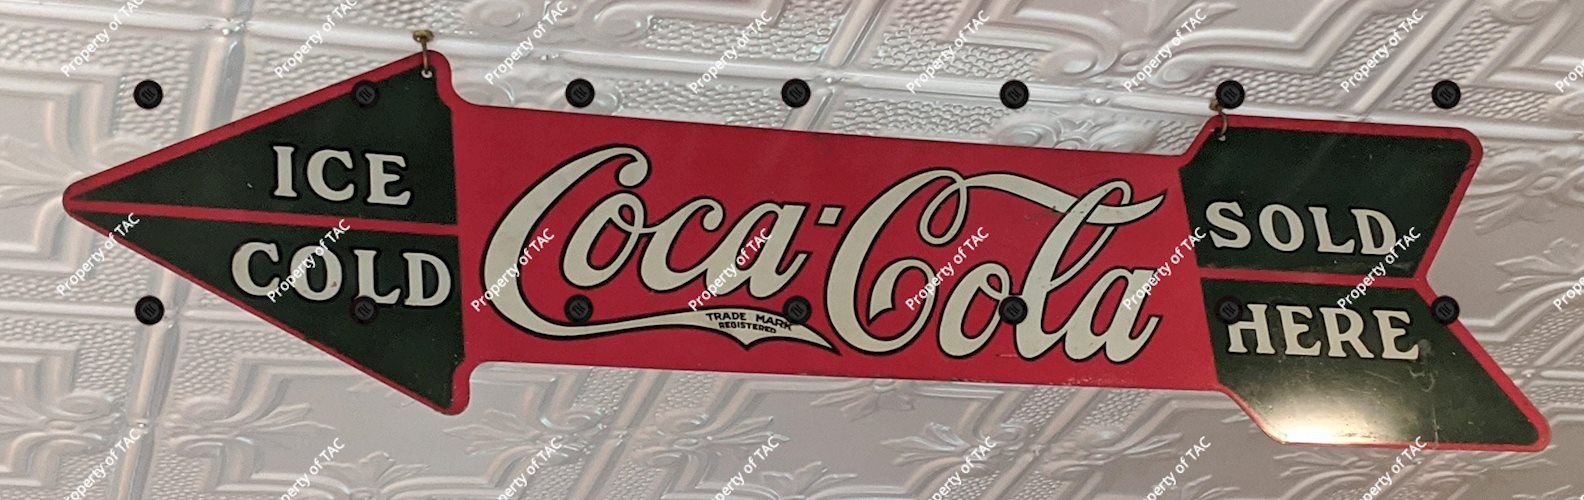 Ice Cold Coca Cola Sold Here DST Tin Arrow Sign